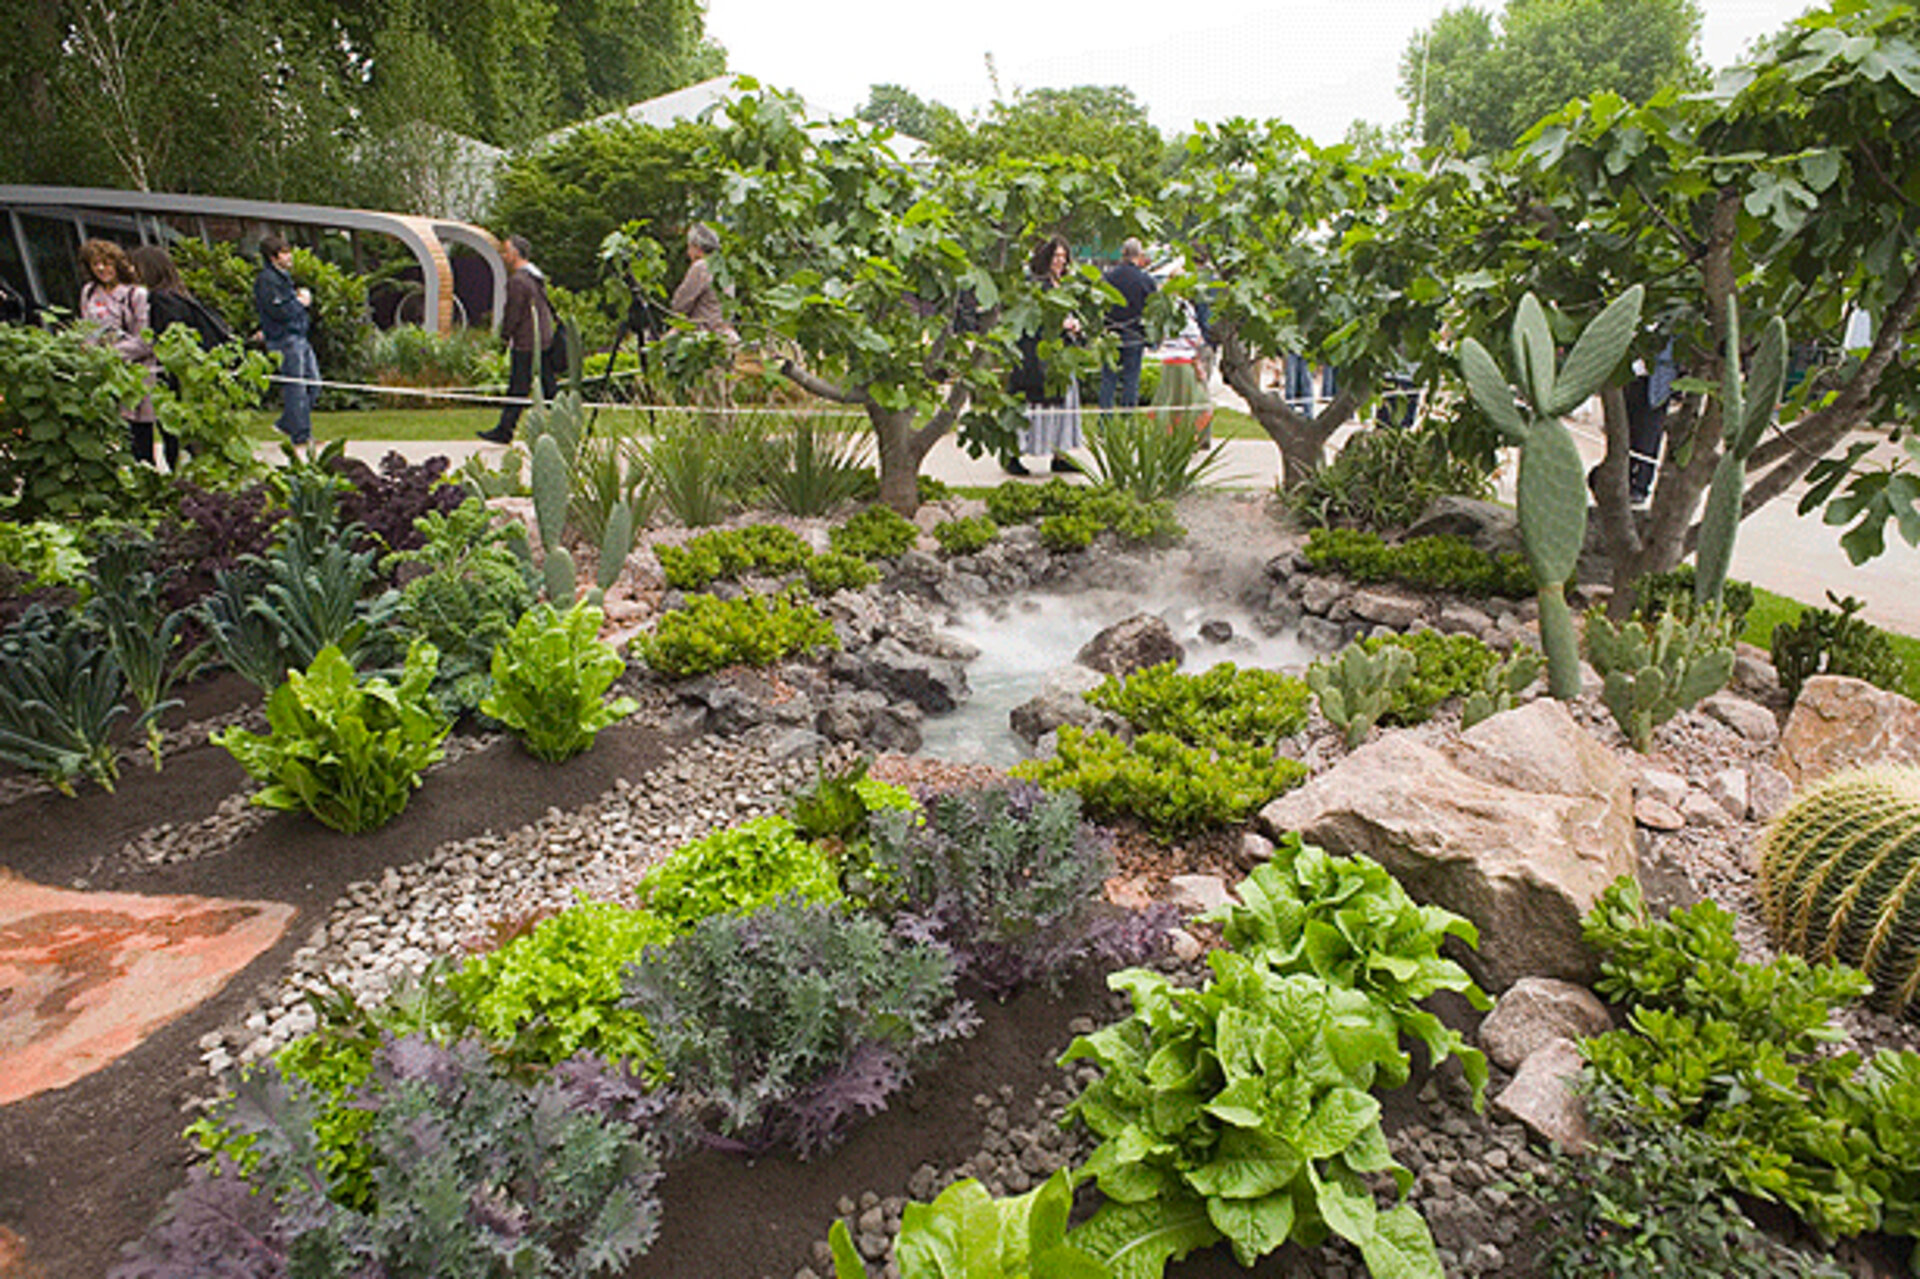 The garden is sub-divided into two interlocking spaces